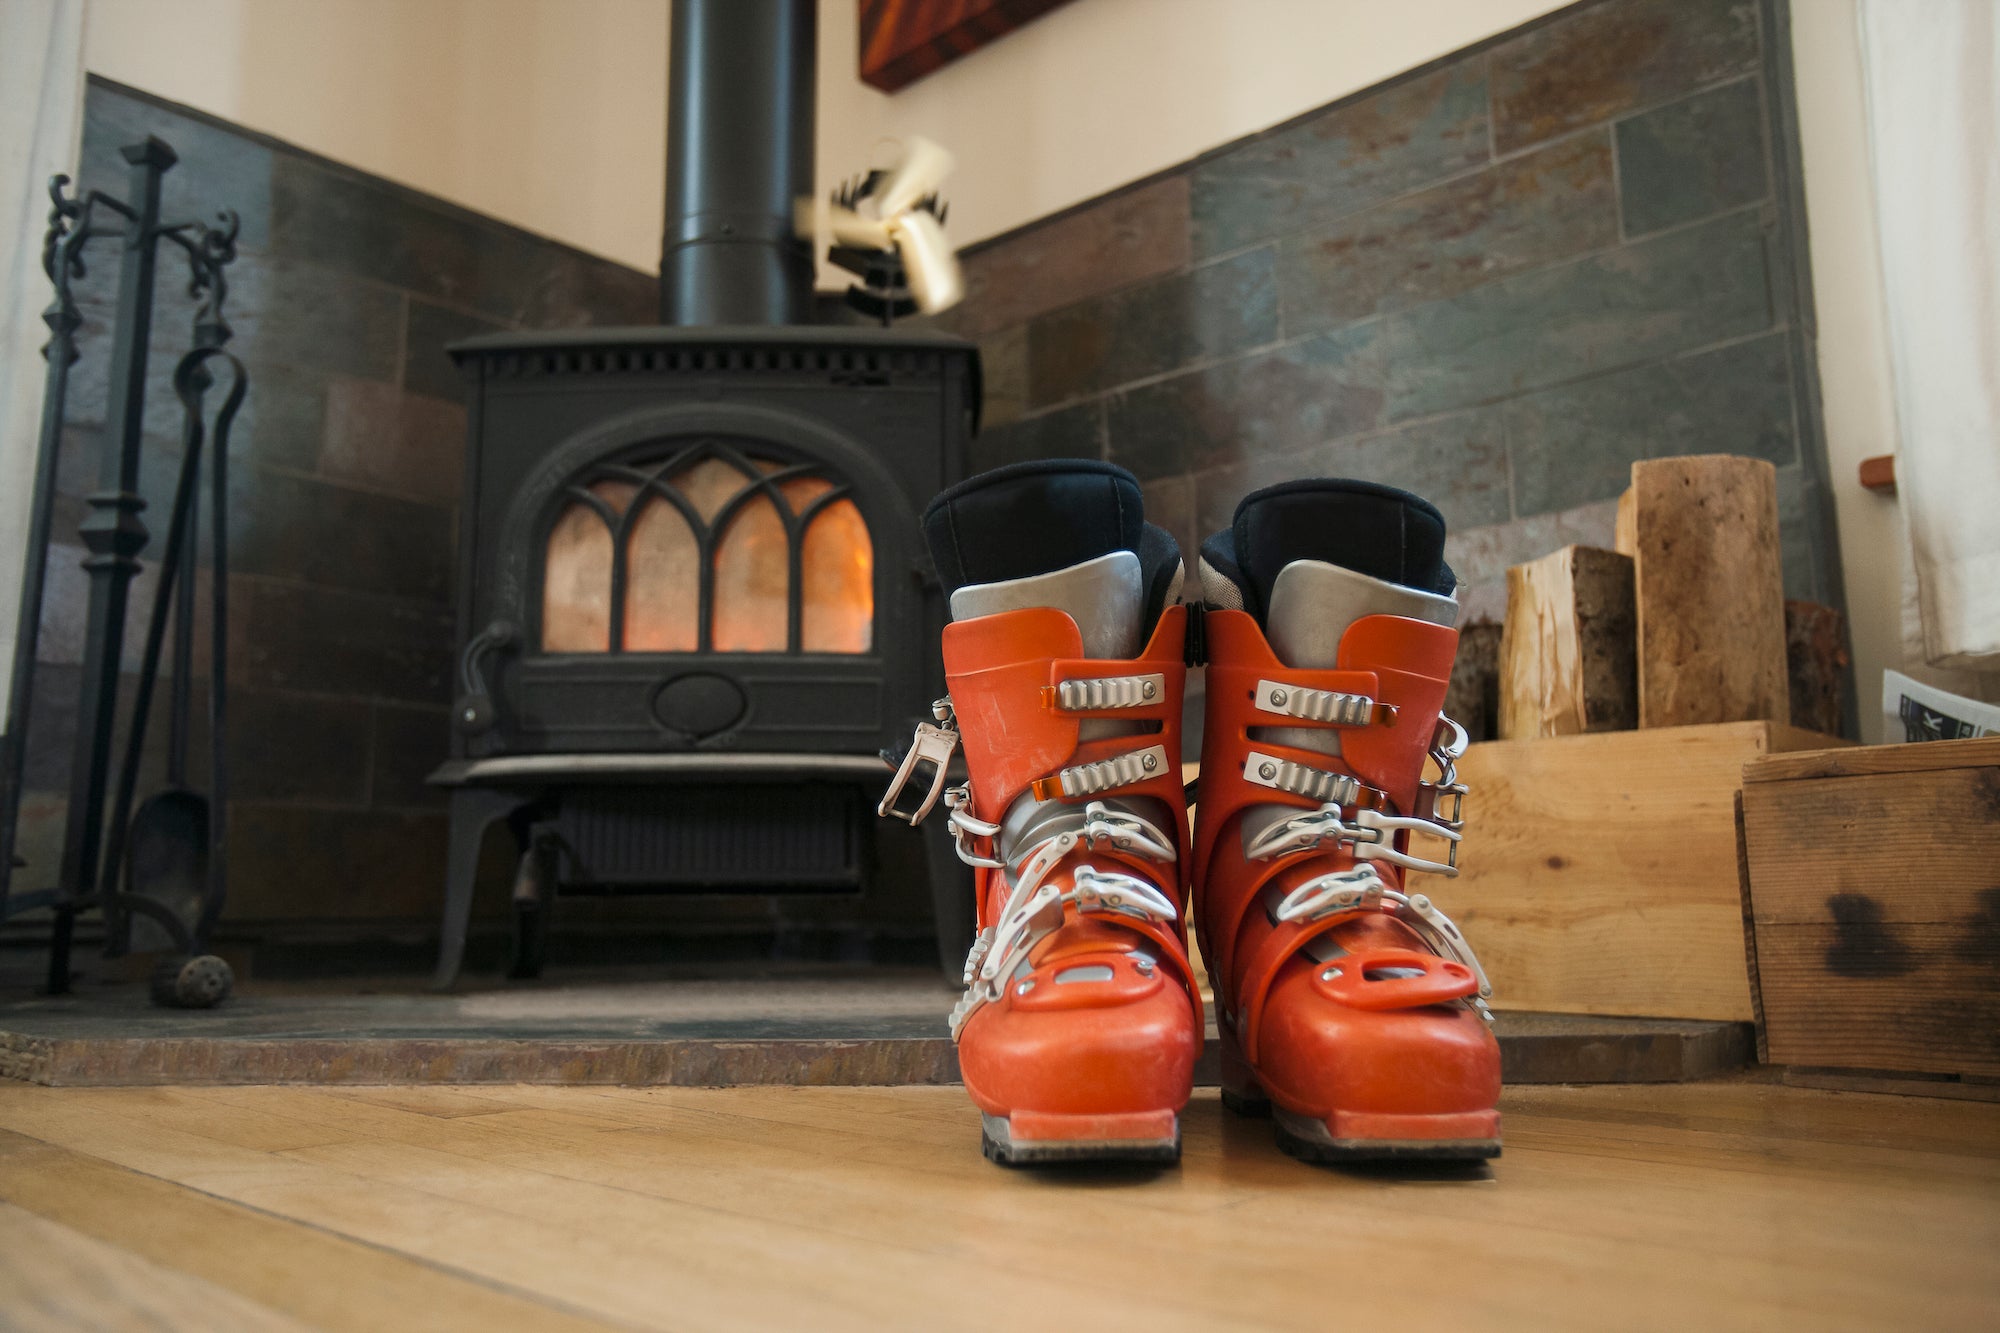 When Should I Replace Old Ski Boots? - Ski Mag